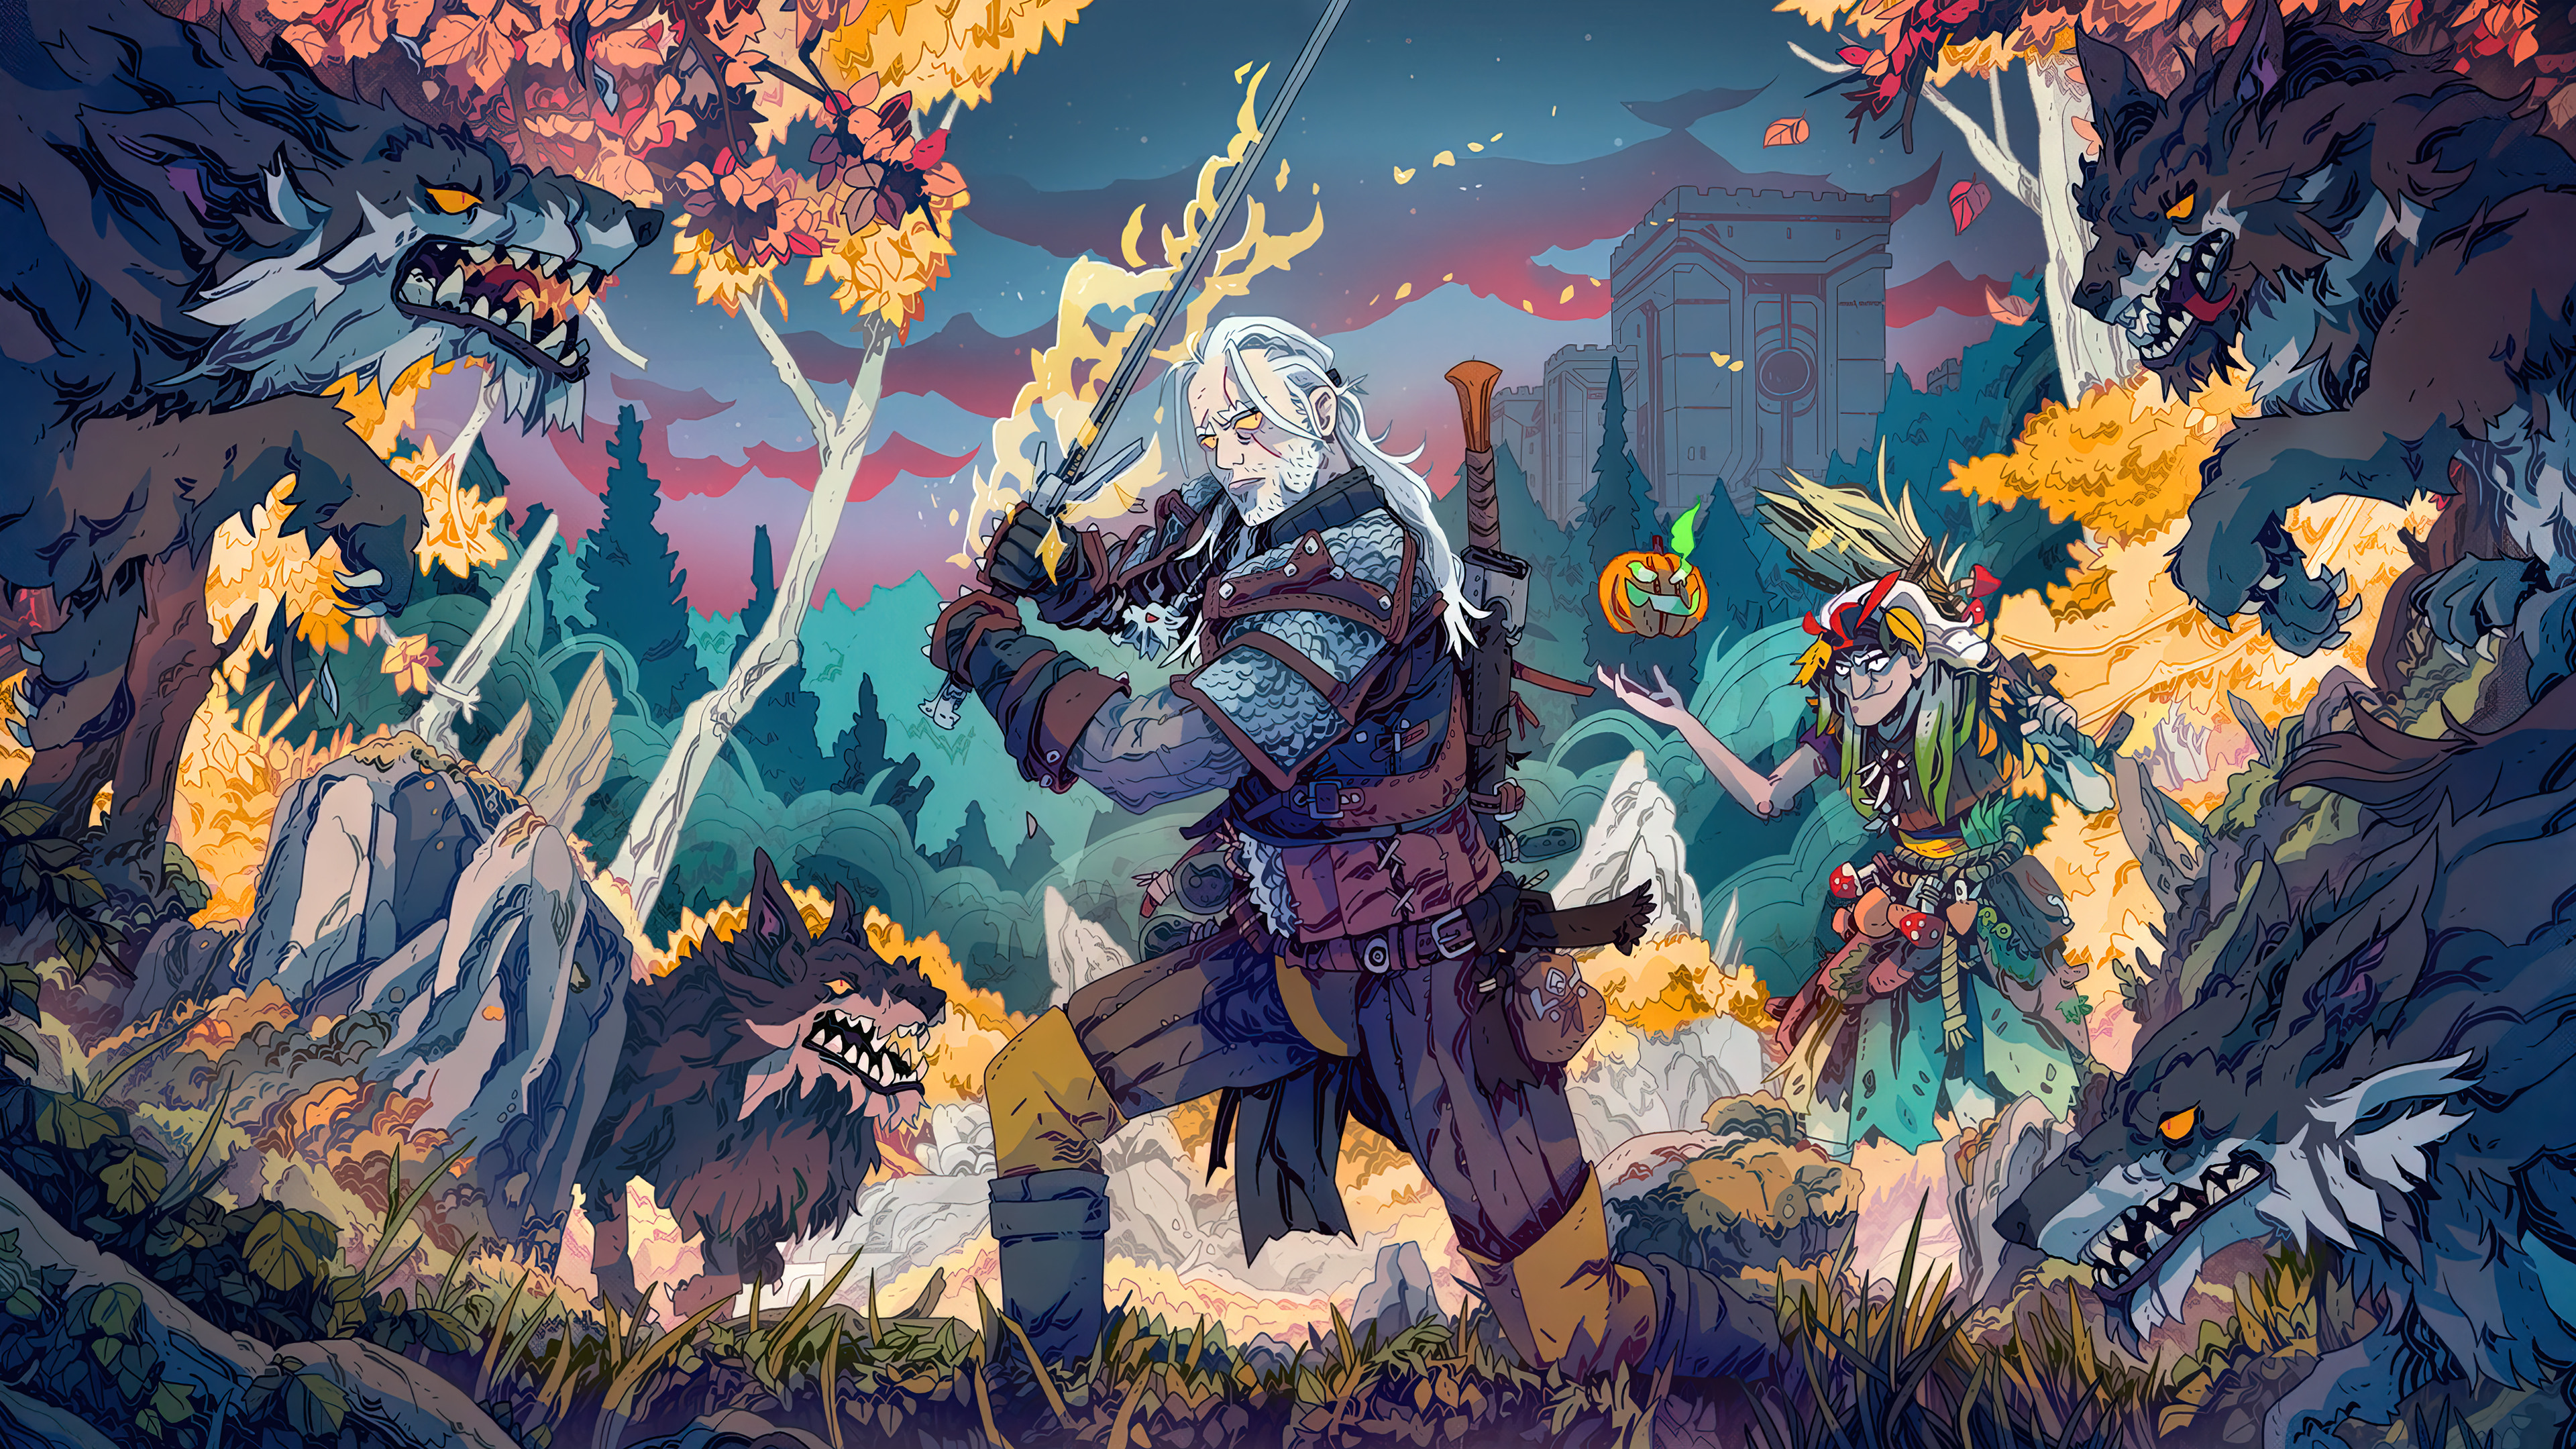 Geralt Of Rivia Witcher 3 7th Anniversary The Witcher The Witcher 3 Wild Hunt Video Game Art Witch W 3840x2160